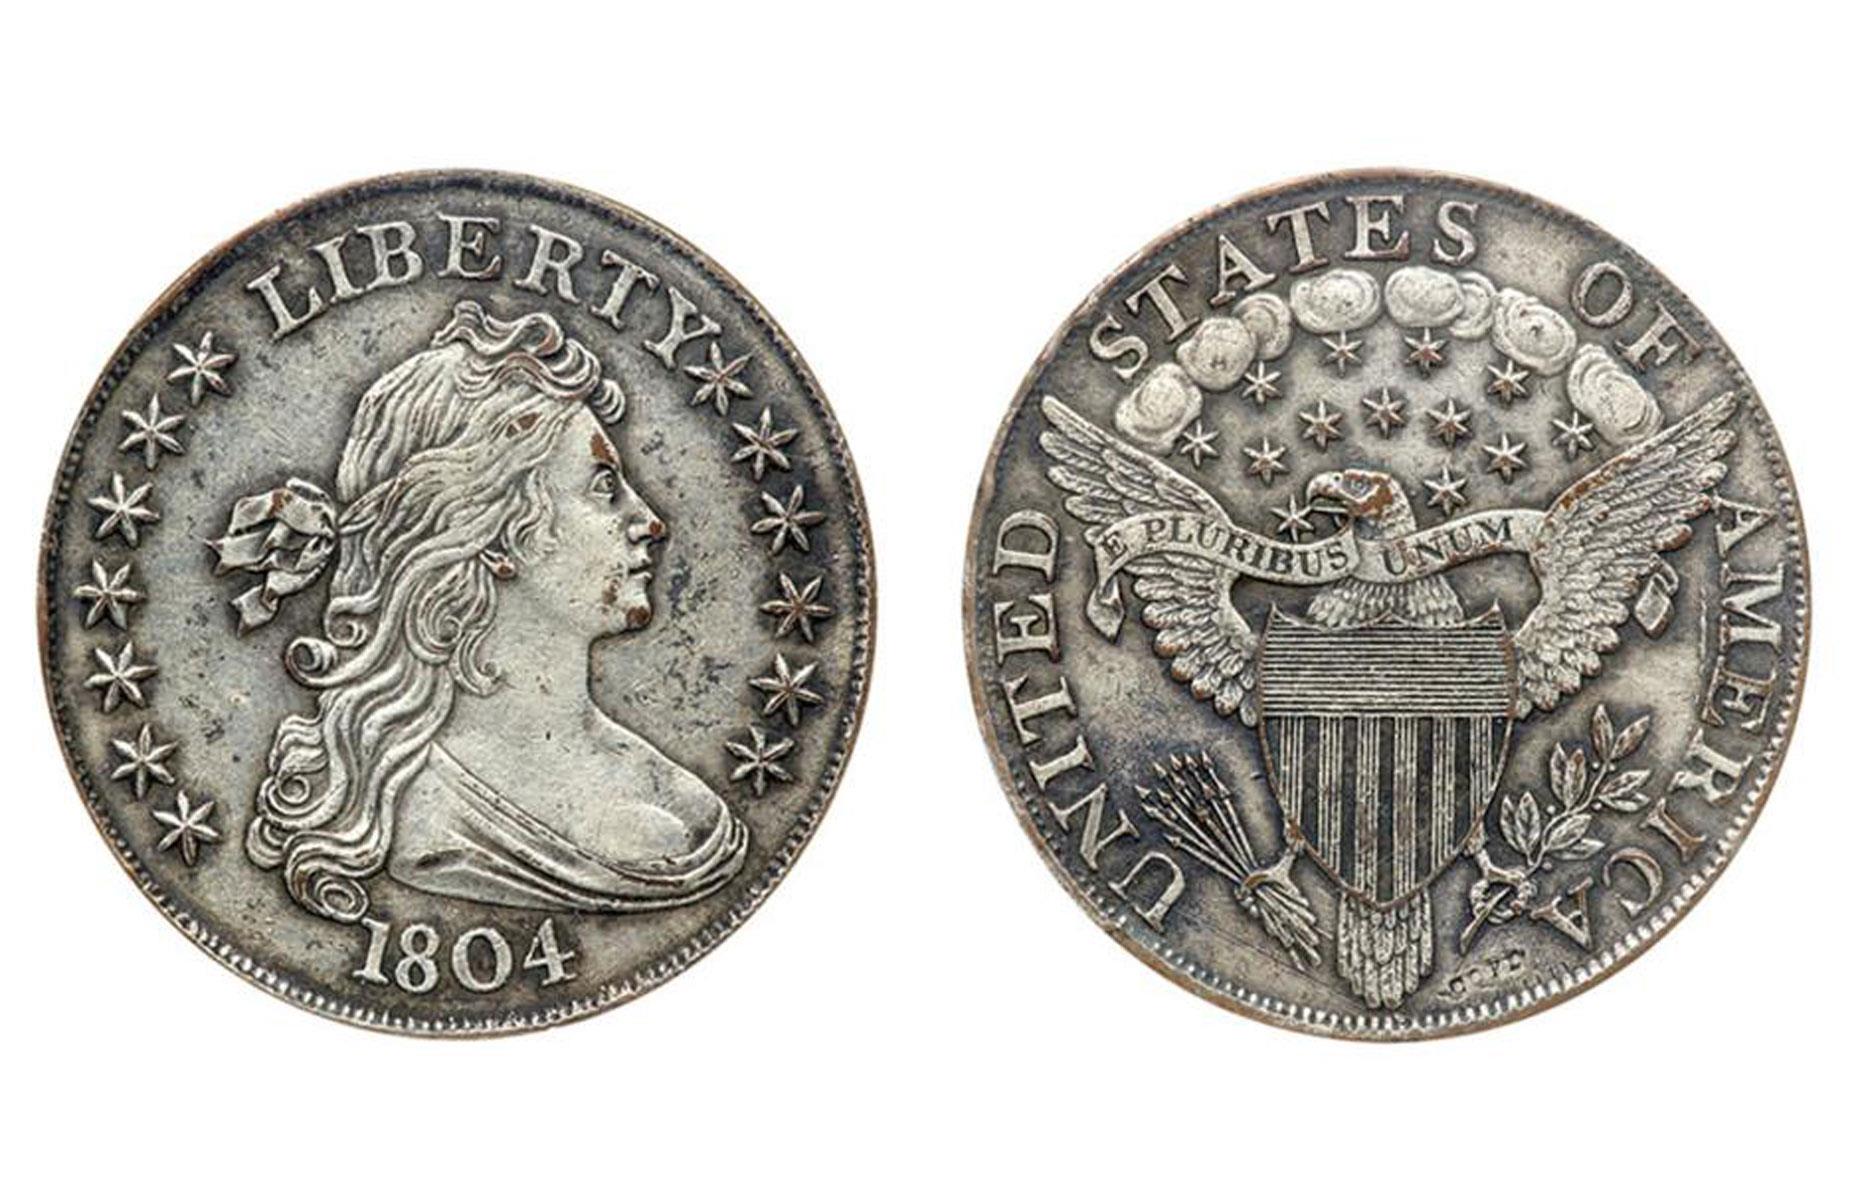 1804/1830s Draped Bust dollar coin: up to $7.68 million